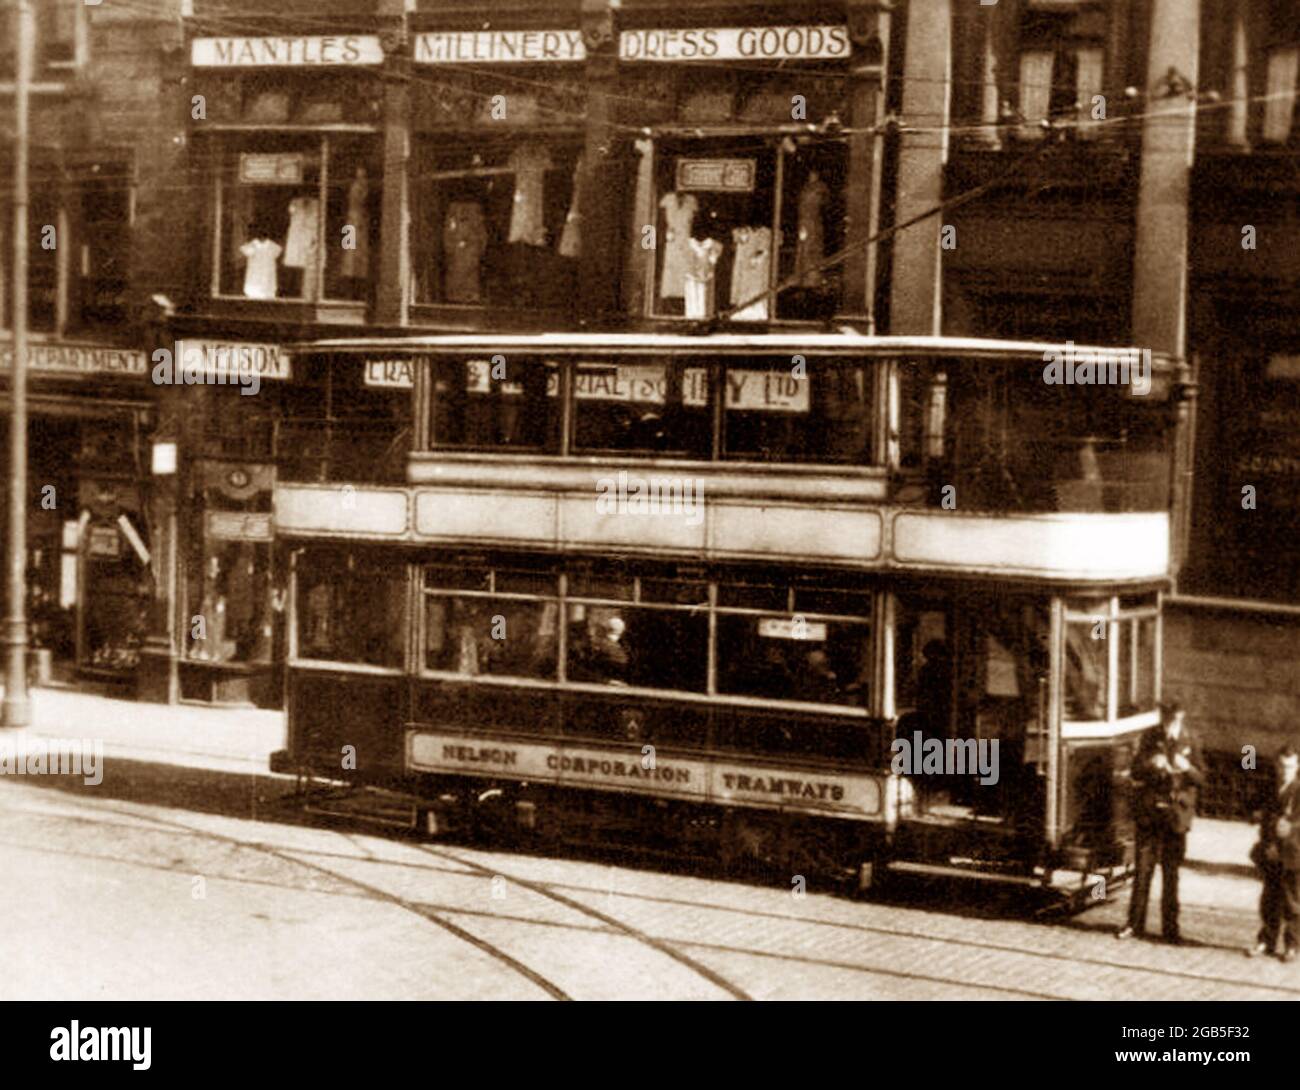 Nelson Corporation tram, possibly 1920s Stock Photo